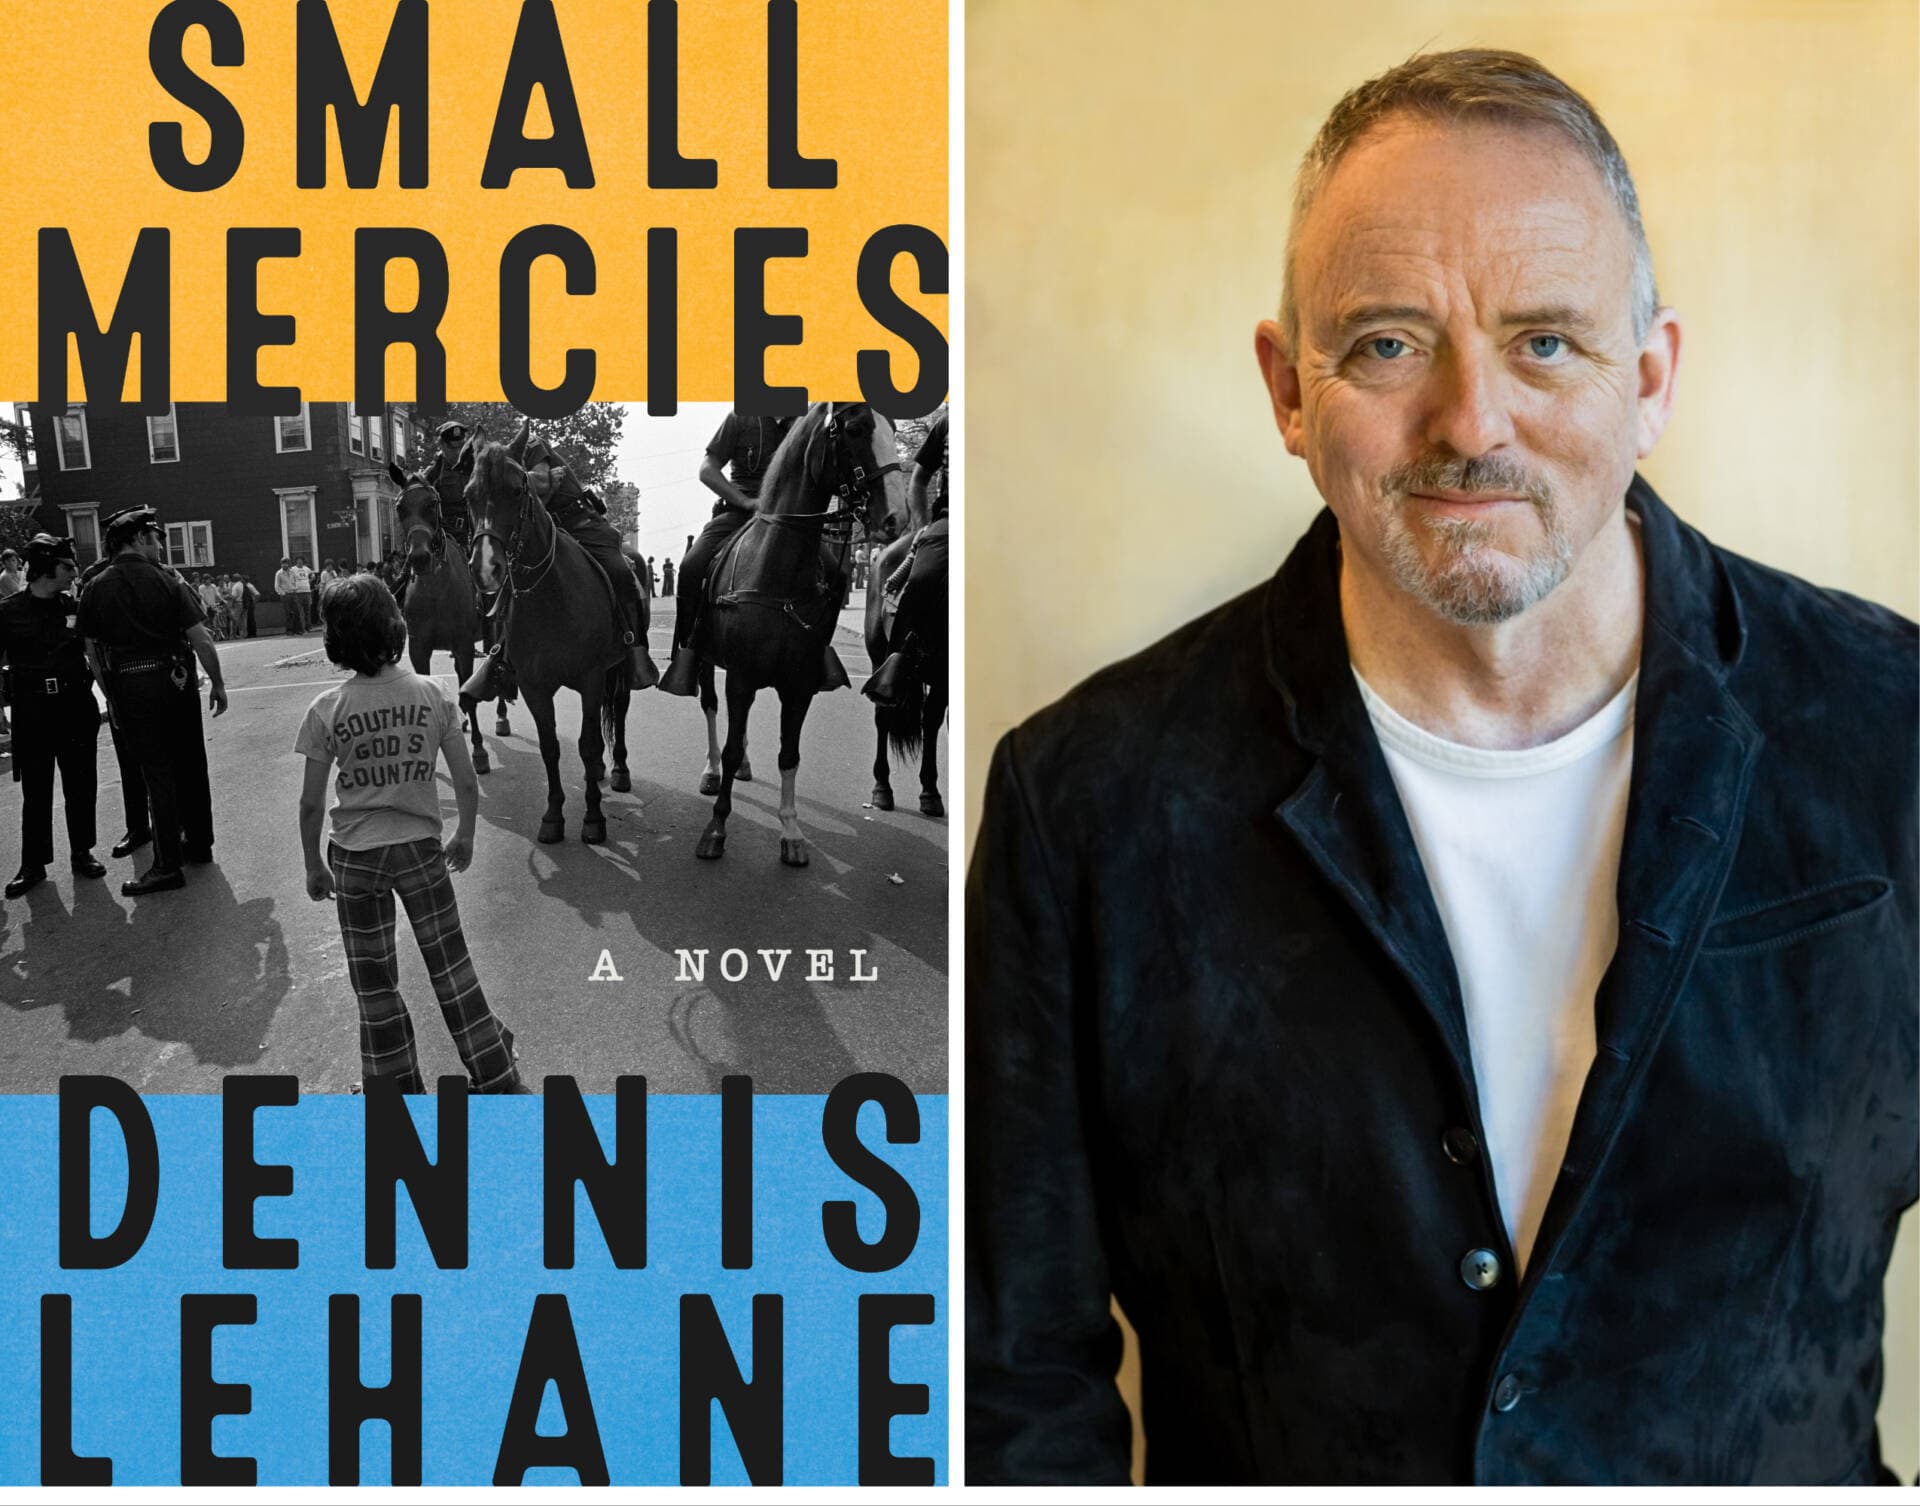 Dennis Lehane is the author of "Small Mercies." (Courtesy the publishers; photo by BYC Photography)